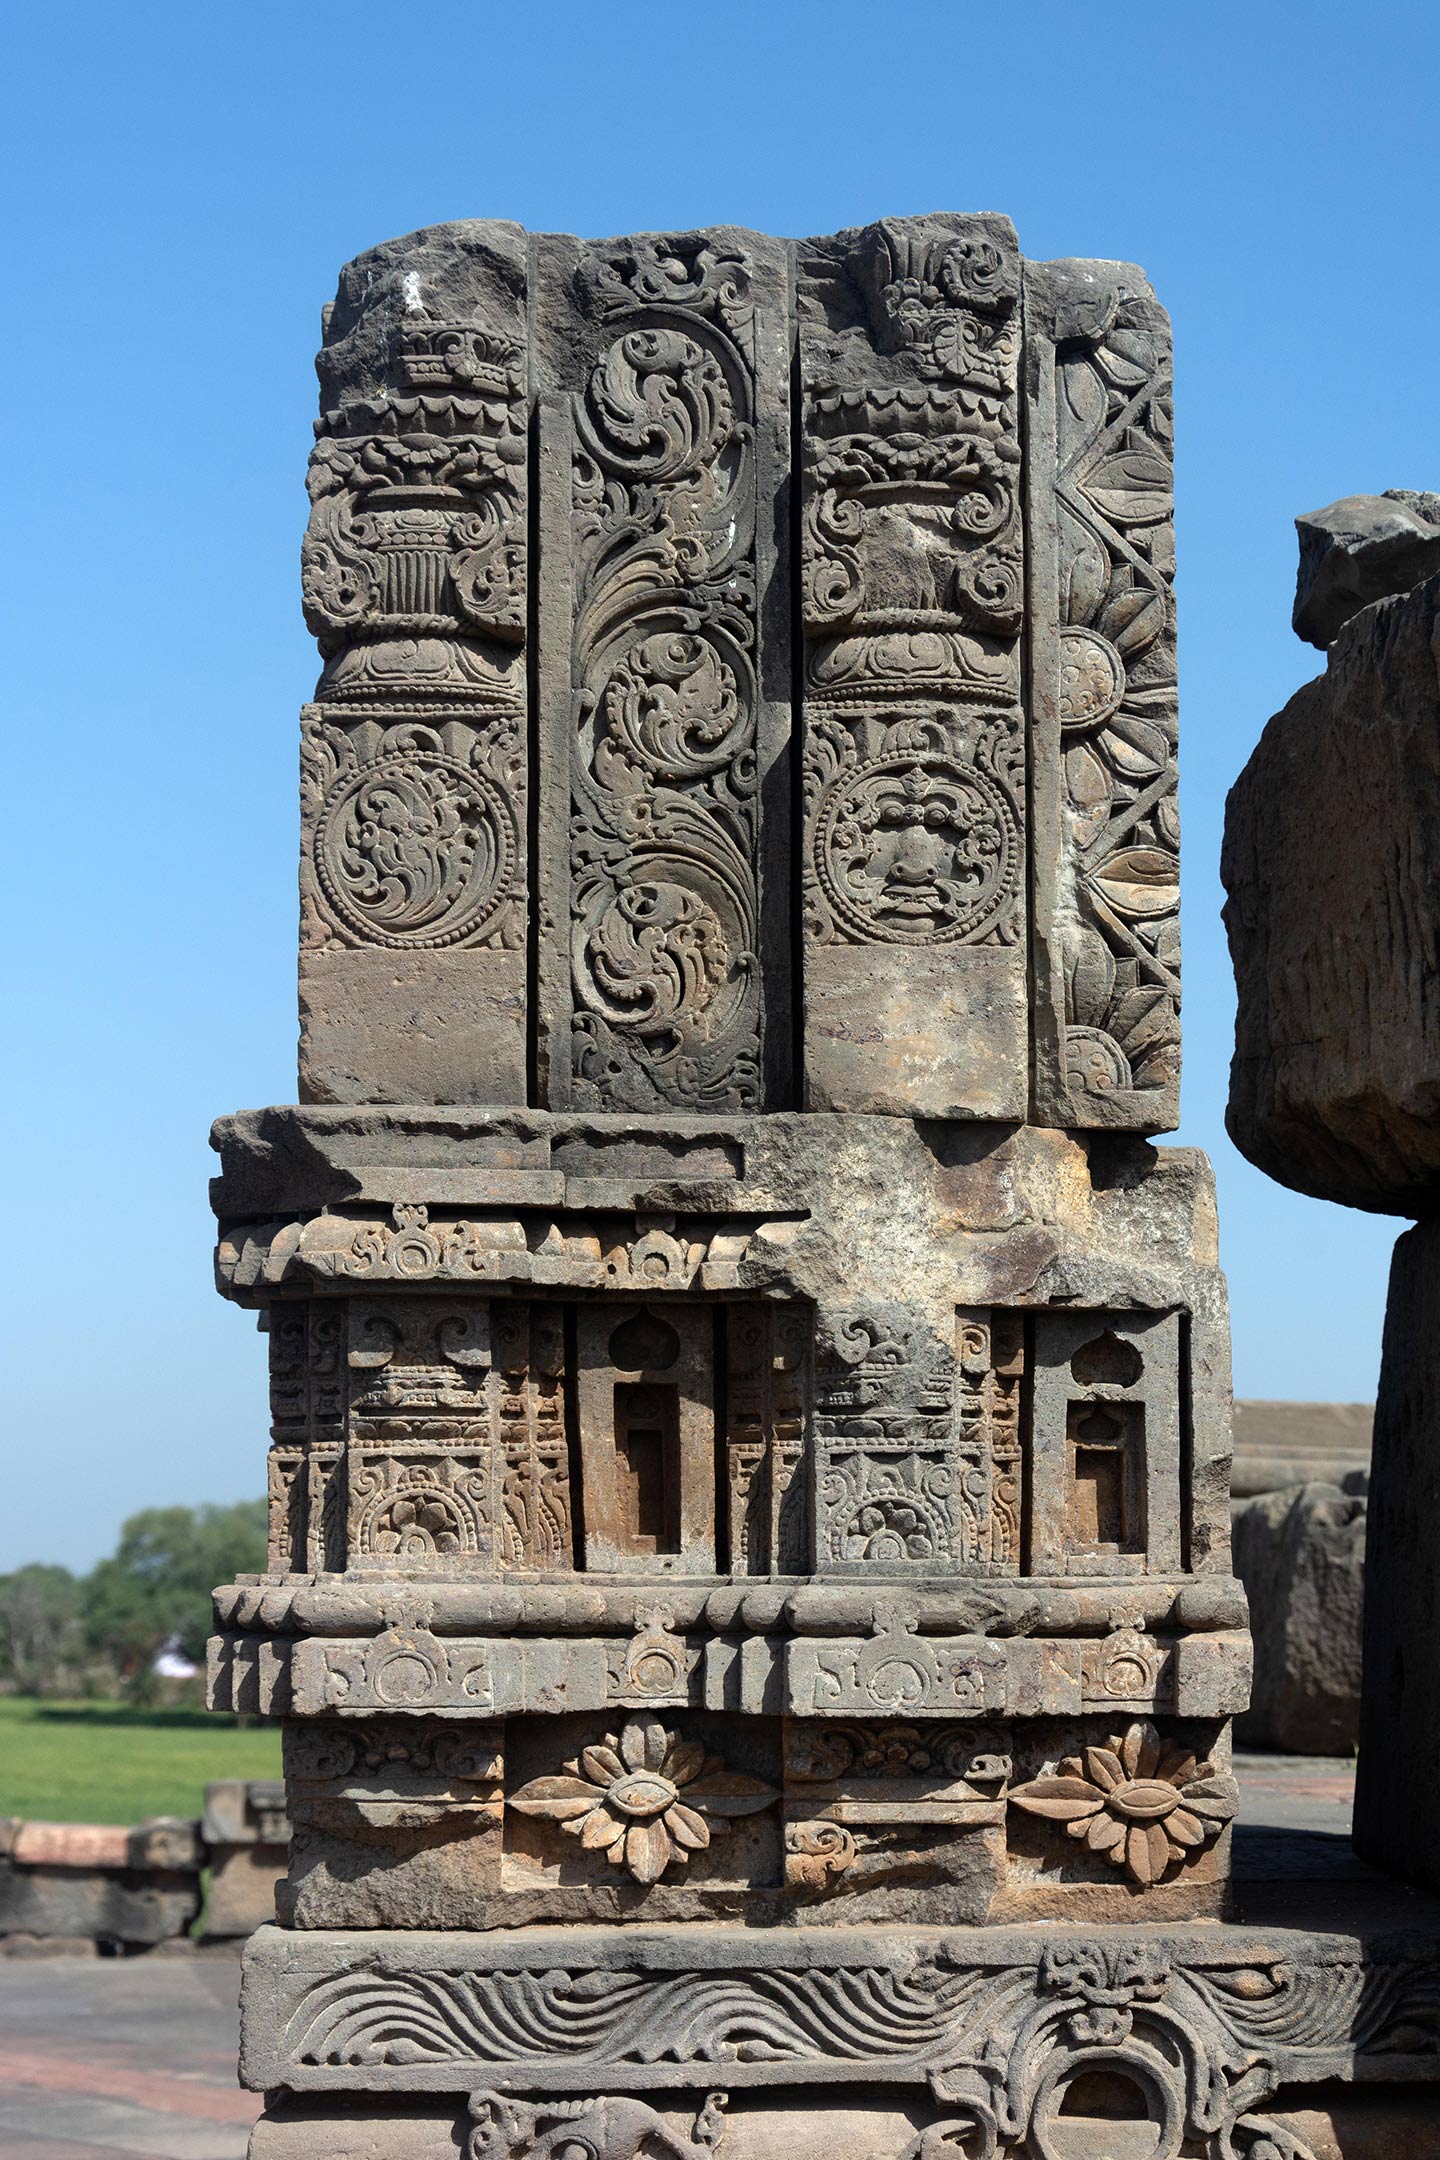 The upper block has the kalpavrisksha (tree of life) motif running along a central band. The panels on either side are damaged but visible features include the kalpa lata (creeper) motif (bottom left), the purna ghata (overflowing pot of prosperity) motif (mid-sections), and the kirtimukha motif (bottom right). The block in the middle has the ardha padma (half lotus) motif.